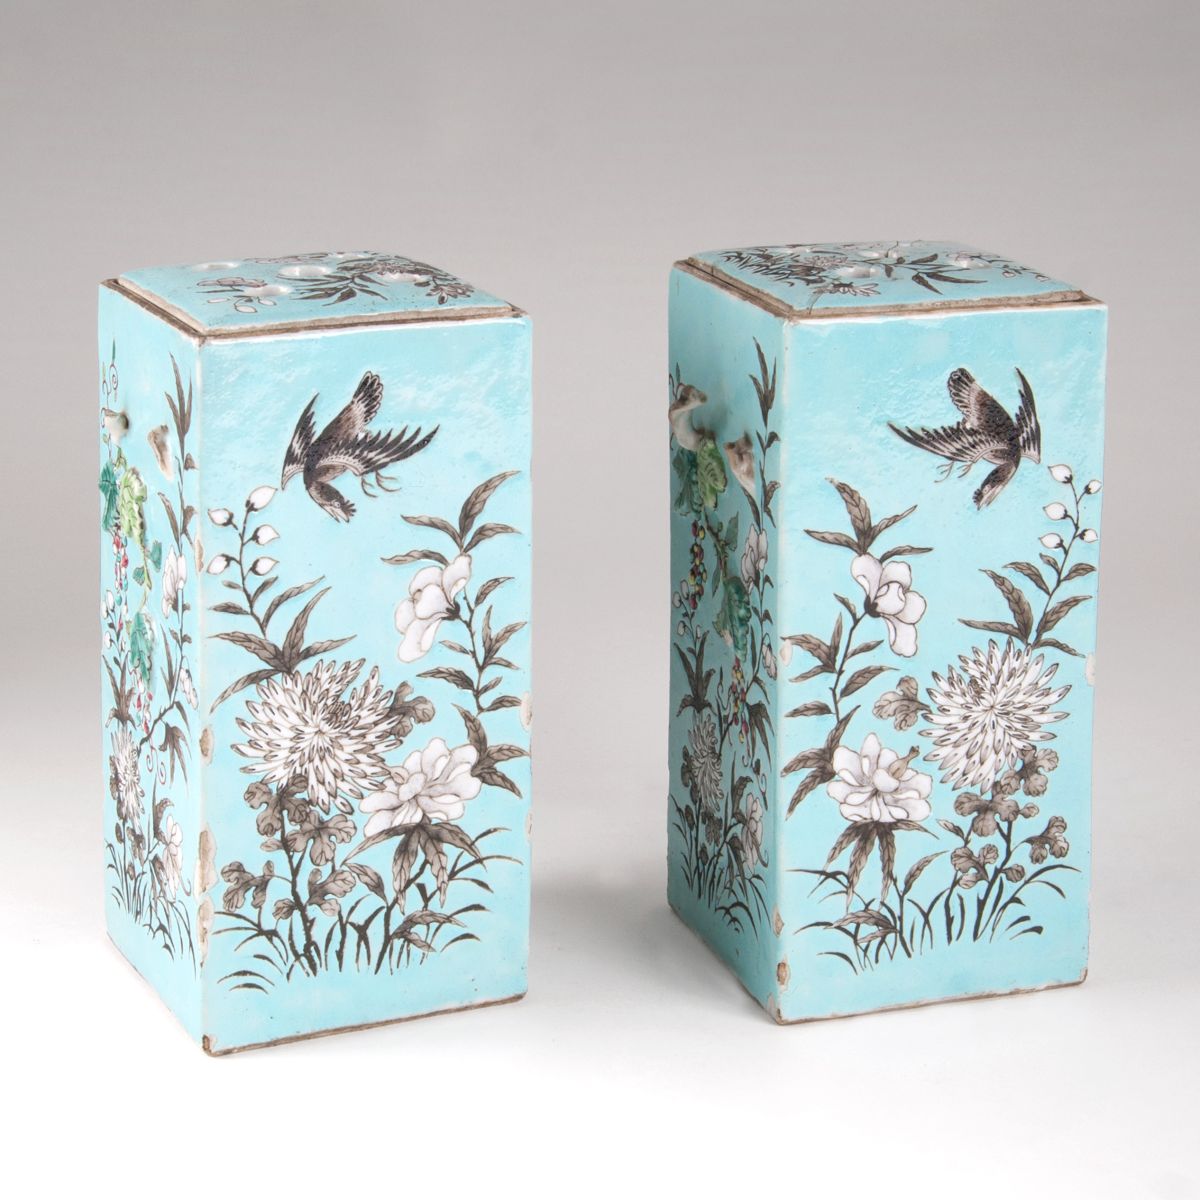 A pair of square-cut vases with branche-shaped handles - image 2